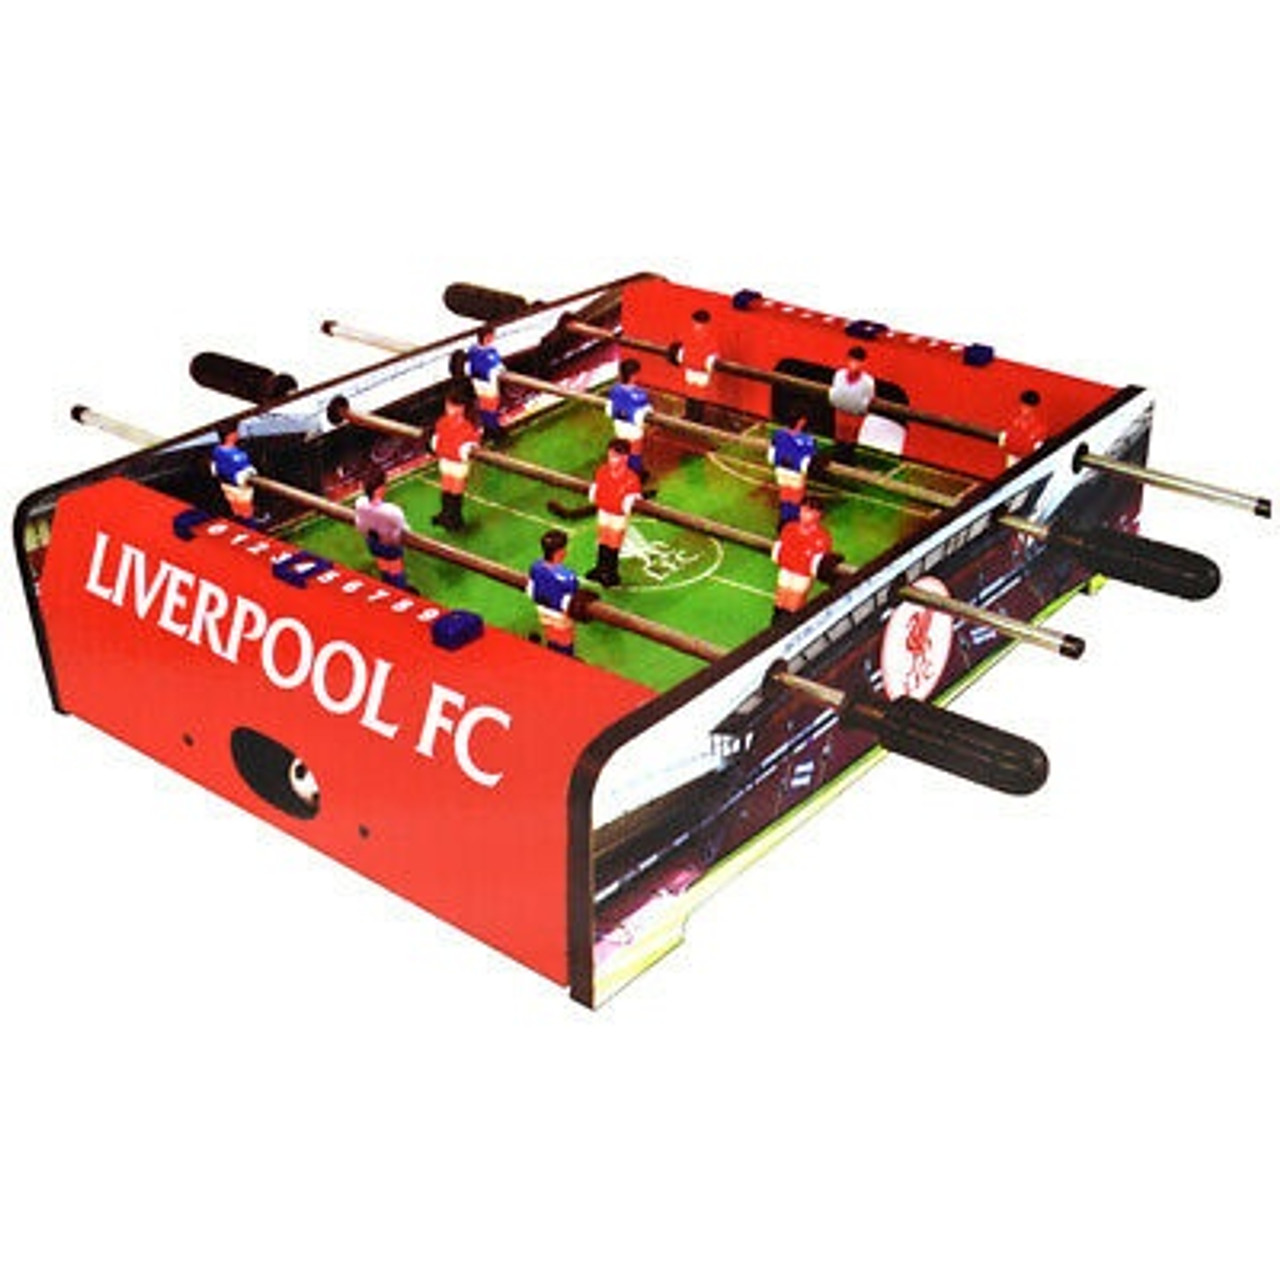 LIVERPOOL 20 INCH FOOTBALL TABLE GAME